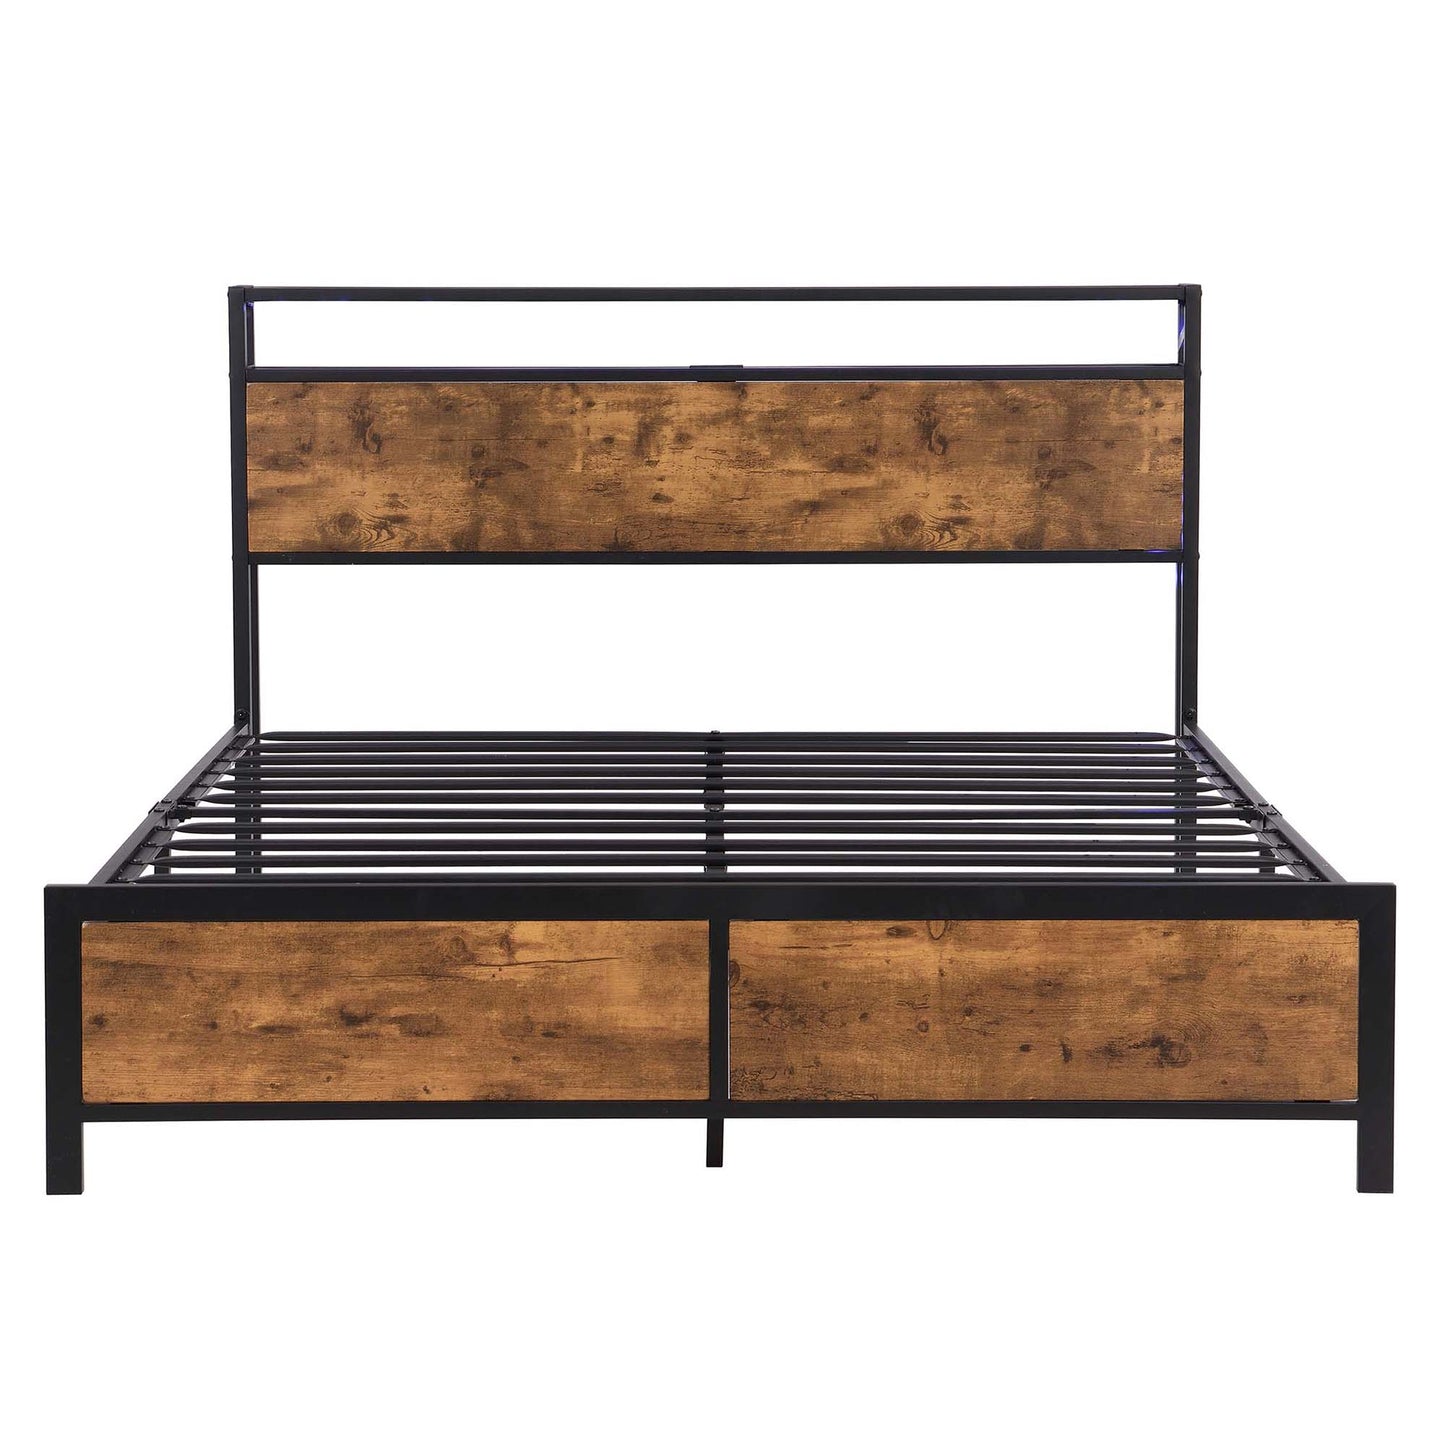 SYNGAR Platform Bed Frame Queen Size with Wooden Storage Headboard, LED Lights and USB Ports, Industrial Metal Queen Bed Frame with Slat Support, Noise Free, No Box Spring Needed, Rustic Brown